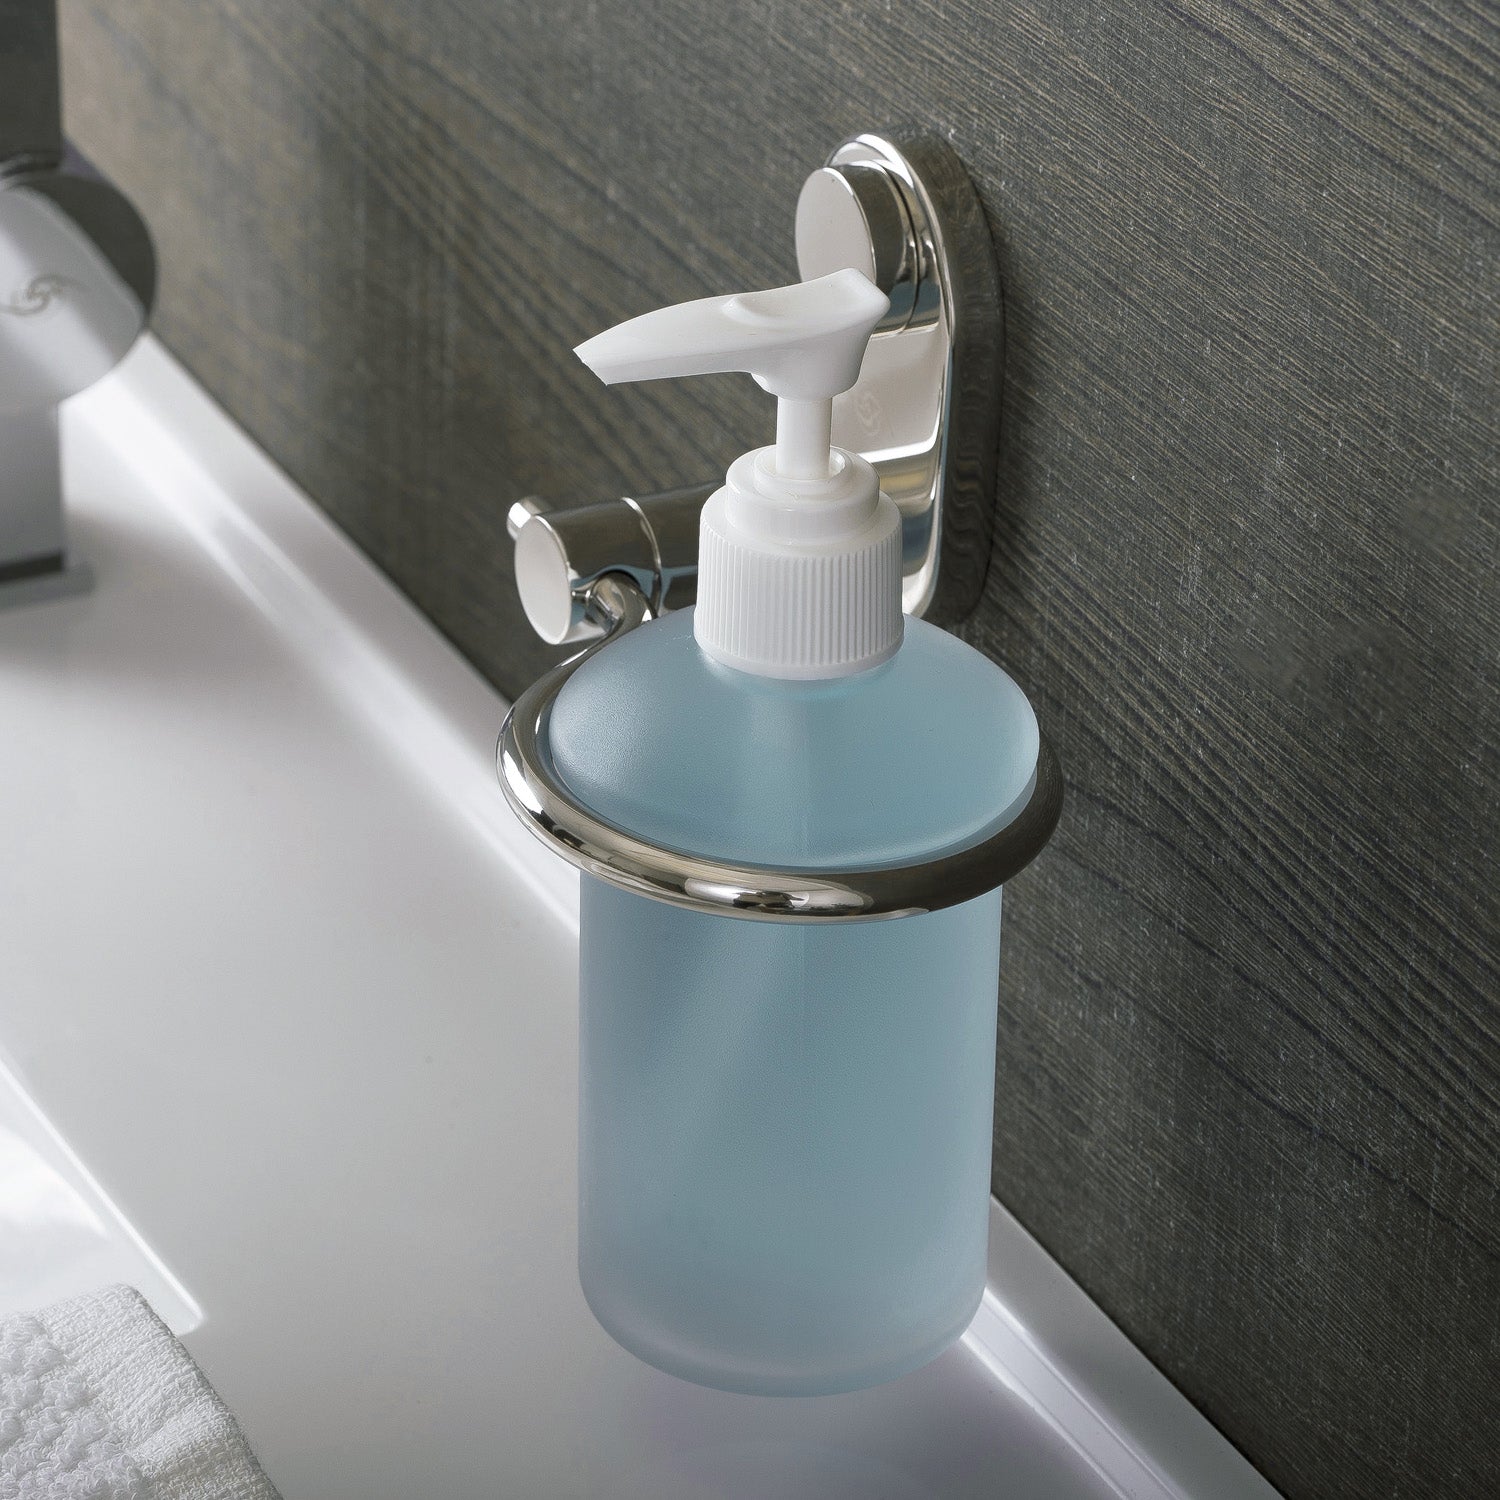 DAX Stainless Steel Soap Dispenser with Glass Bottle, Wall Mount, Satin Finish, 6-1/2 x 4-1/8 x 4-15/16 Inches (DAX-G0213-S)